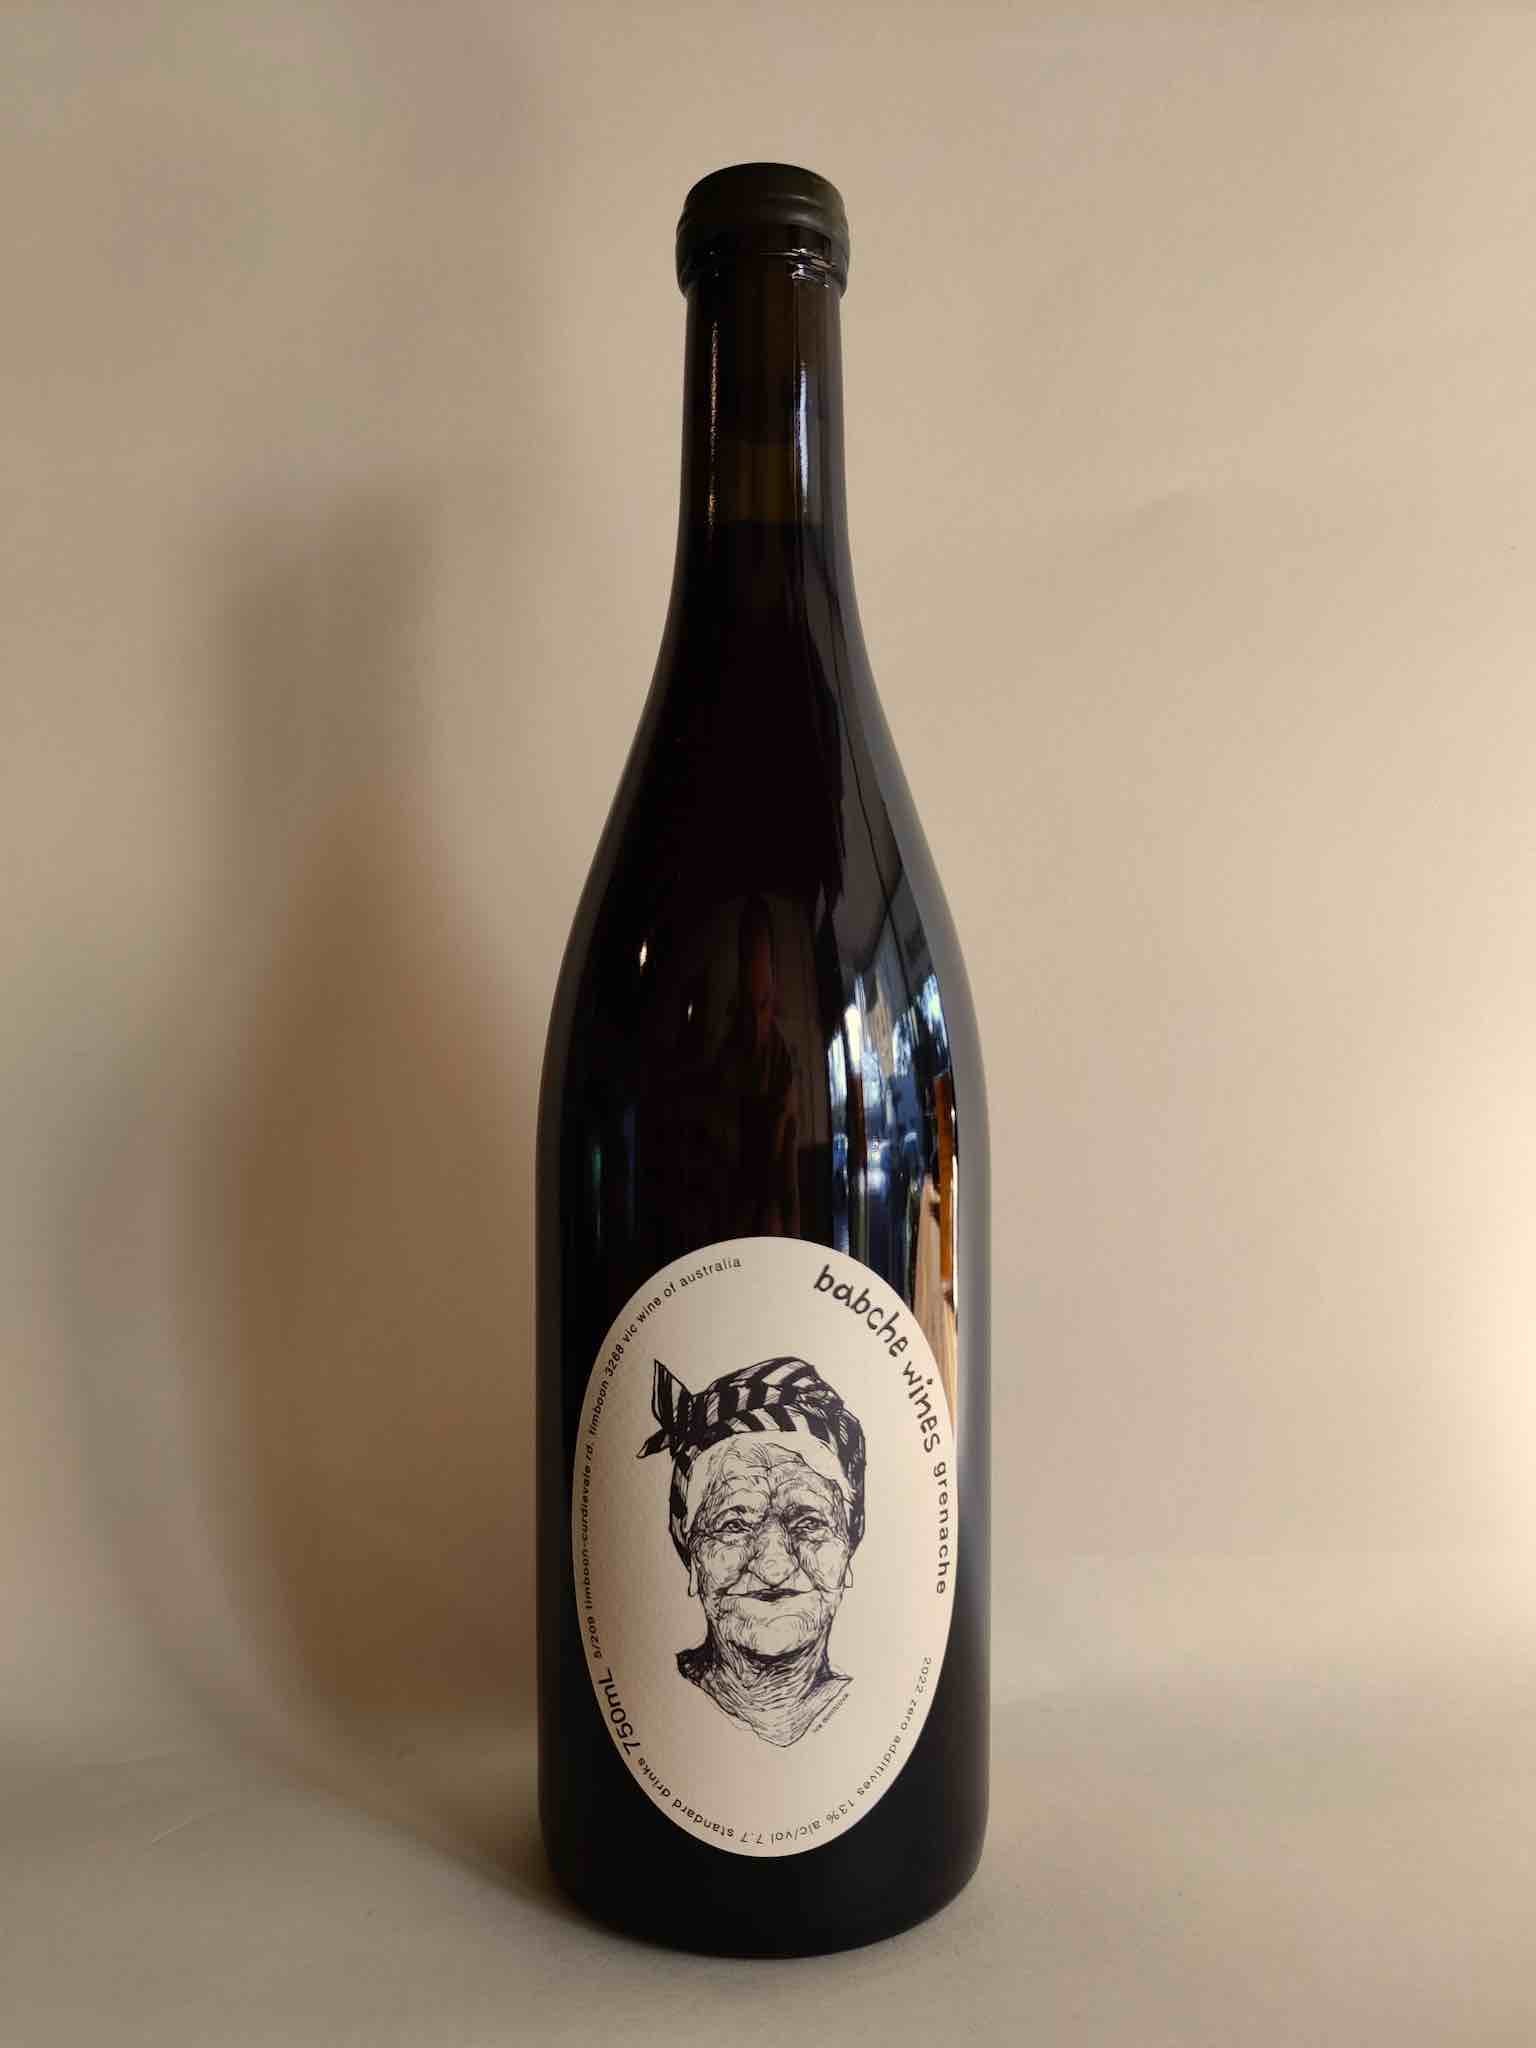 A bottle of Babche Grenache from the Pyrenees, Victoria. 